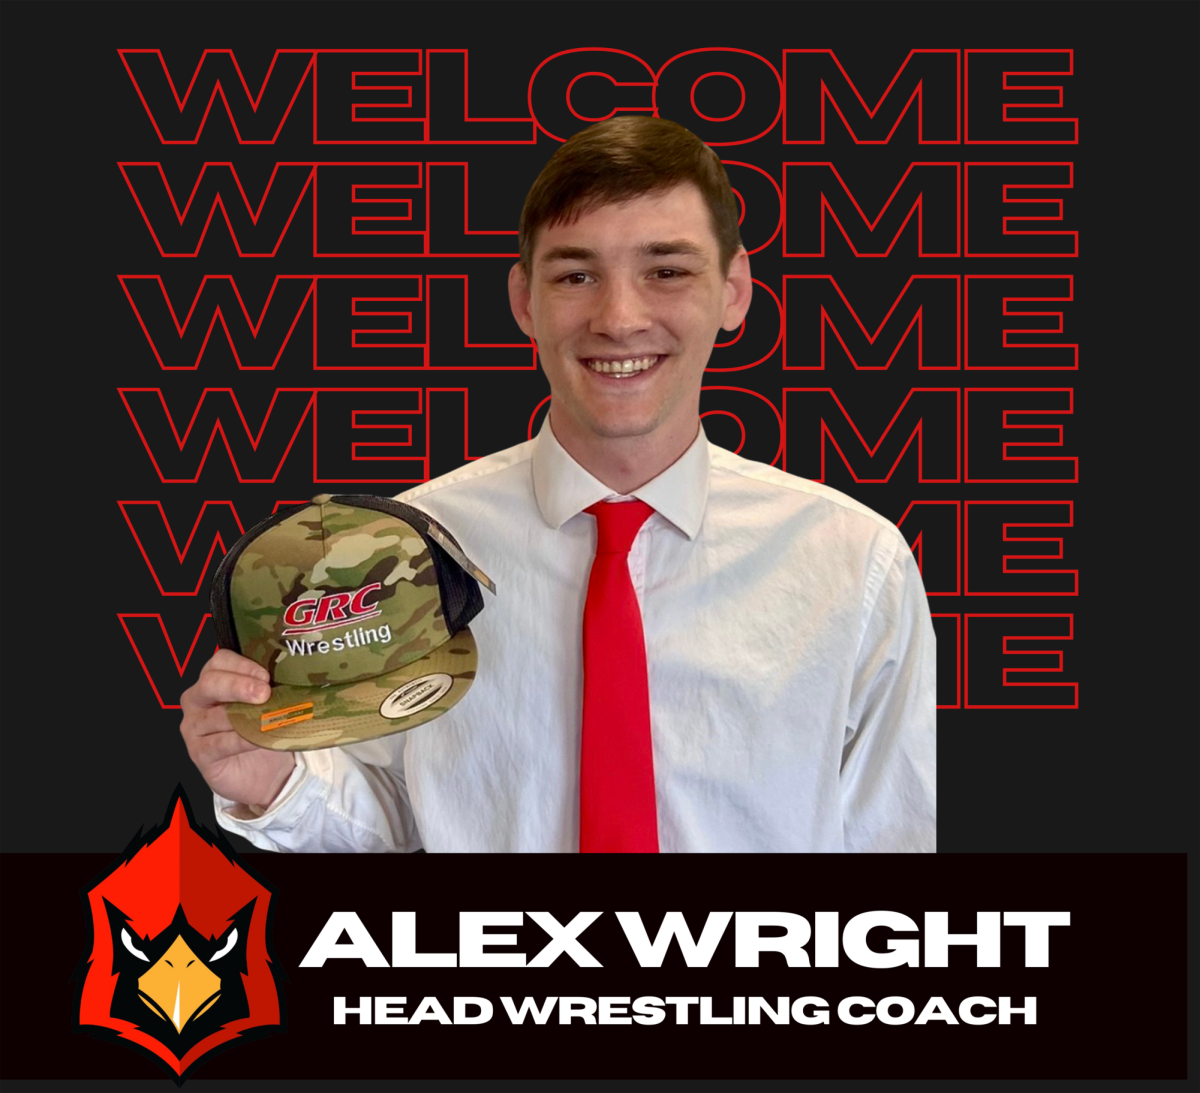 Wright hired as wrestling coach